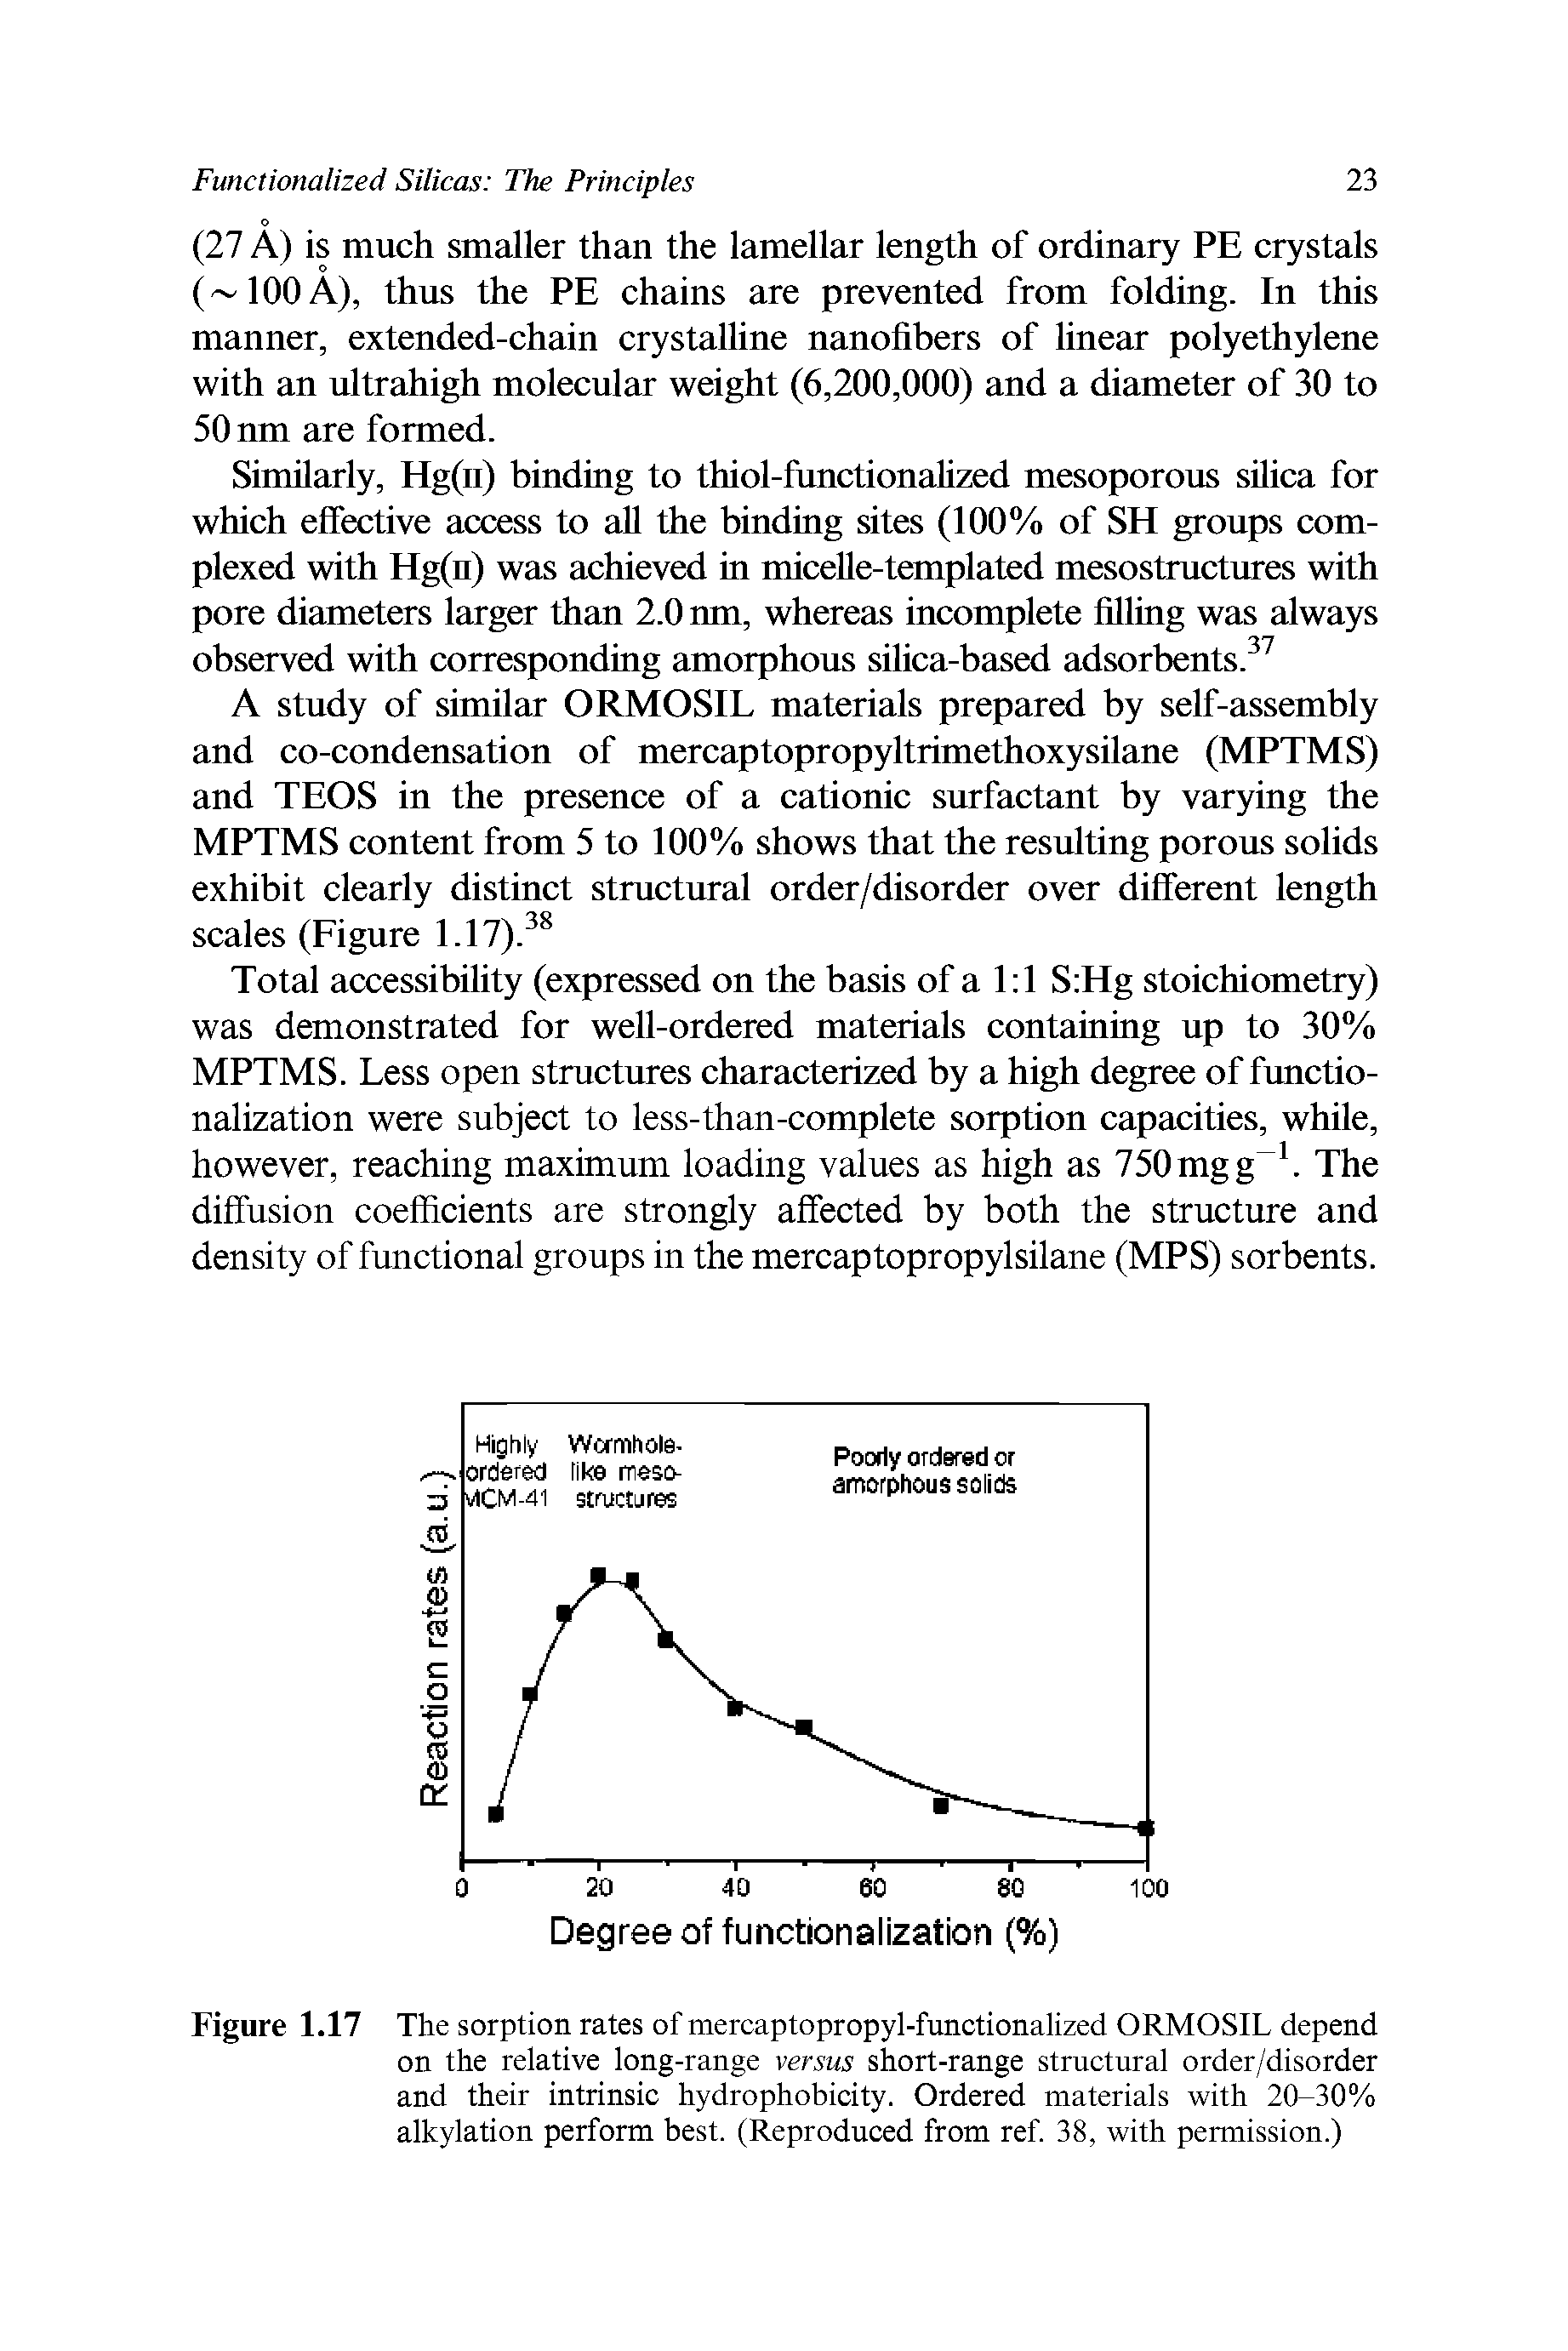 Figure 1.17 The sorption rates of mercaptopropyl-functionalized ORMOSIL depend on the relative long-range versus short-range structural order/disorder and their intrinsic hydrophobicity. Ordered materials with 20-30% alkylation perform best. (Reproduced from ref. 38, with permission.)...